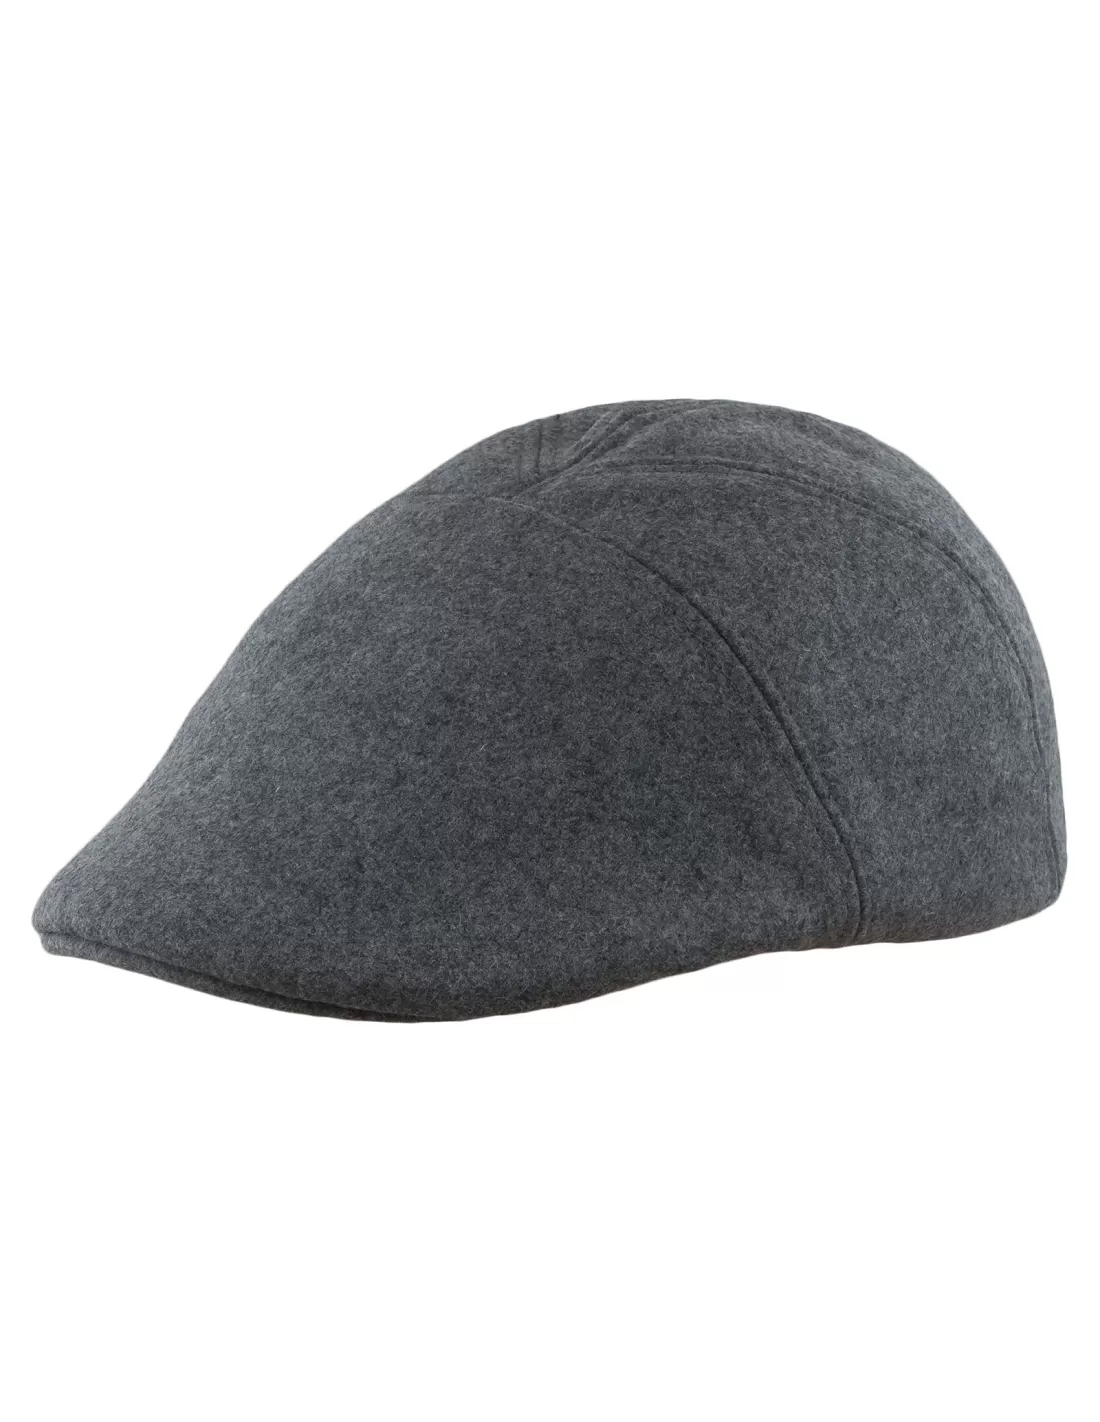 Ivy Five - winter / fall flat cap for man made of high quality wool ...